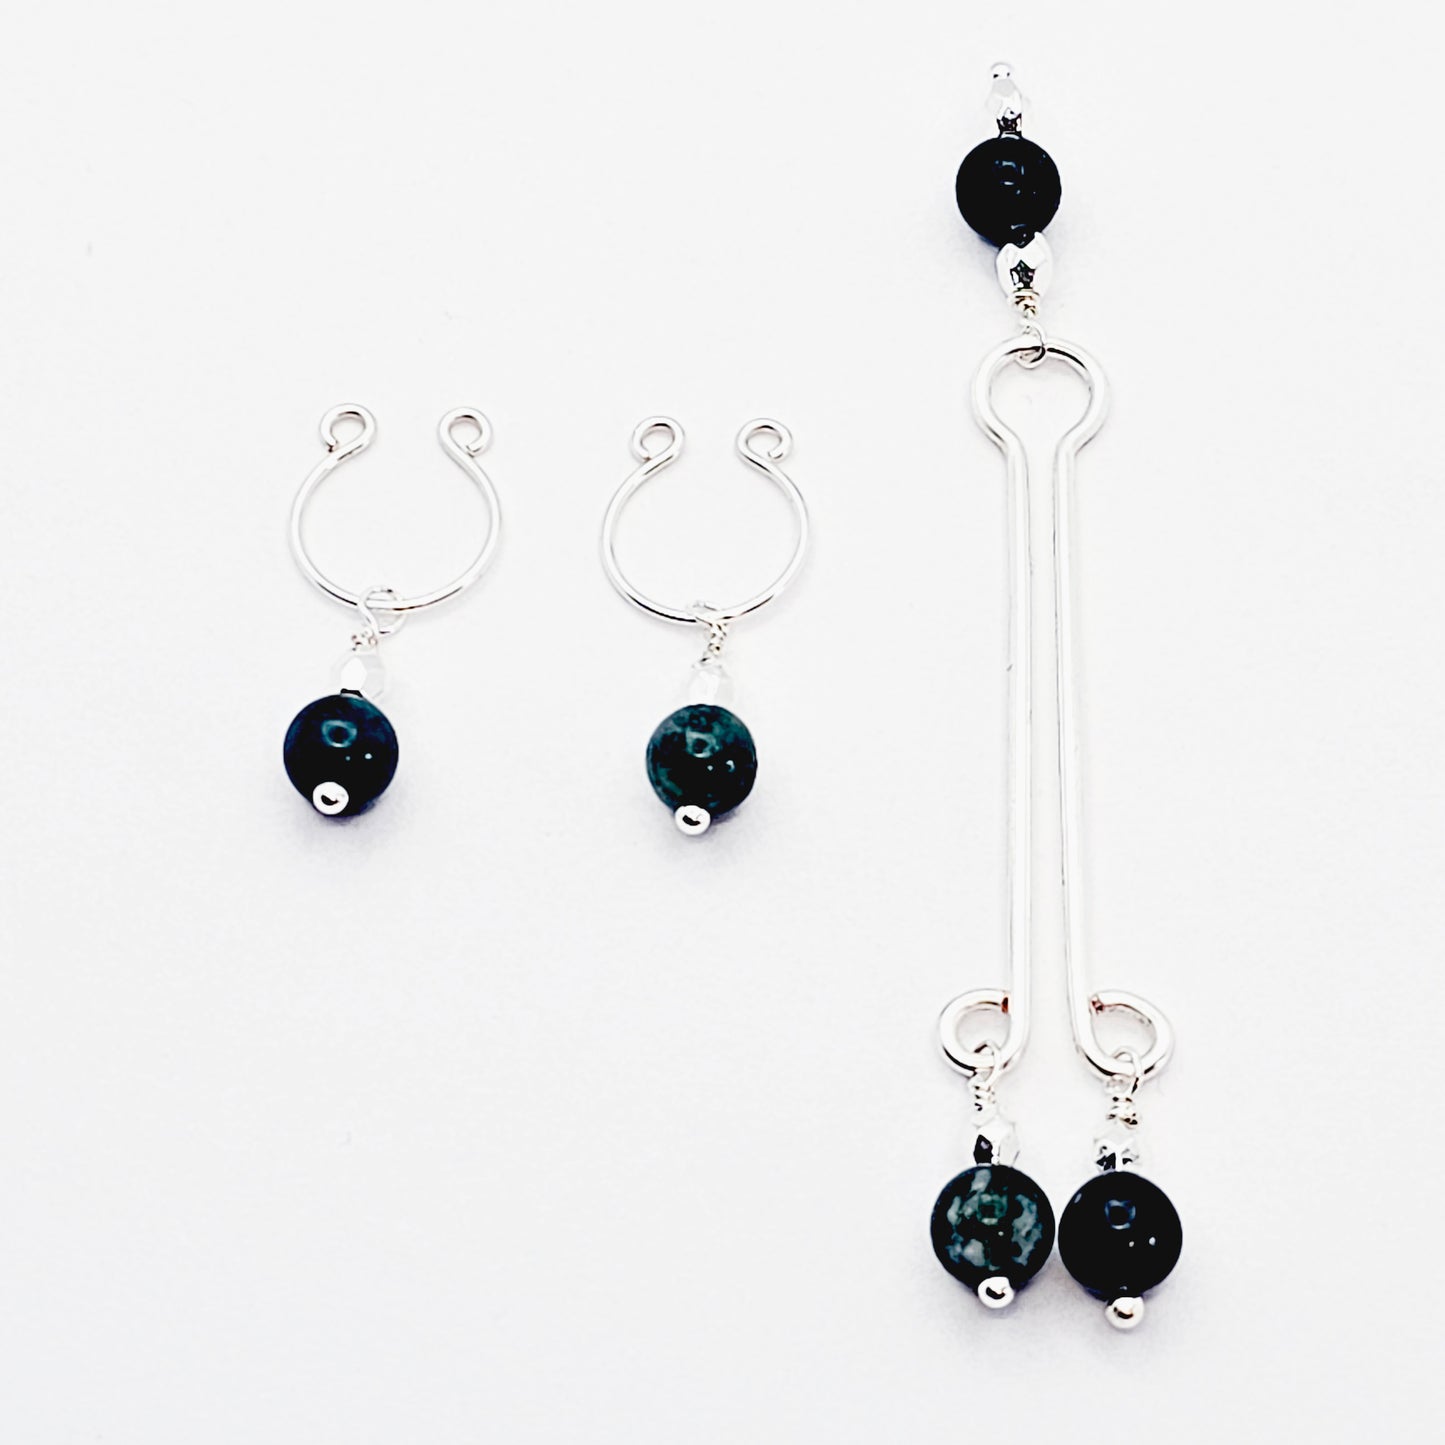 Nipple Ring and Labia Clip with Jasper, Matching Set, Non Piercing. Not Pierced Intimate Body Jewelry for Women.